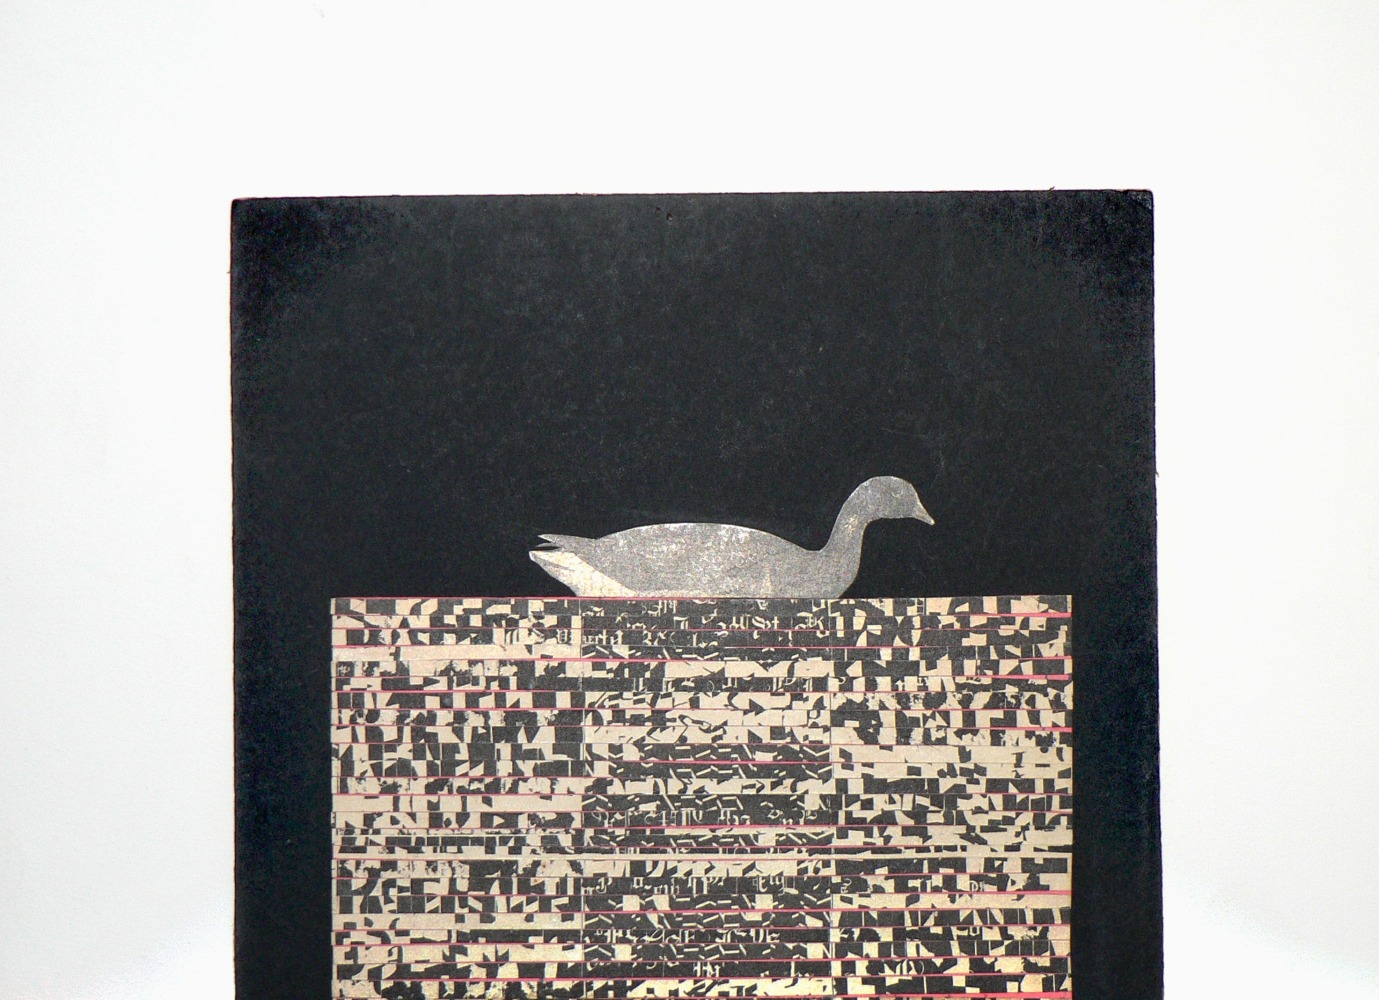 Ray Johnson, Untitled (Moticos Panel with Duck), circa 1955, Mixed media collage on illustration board, 8.375 x 11.5 (21.3 x 29.2), 16116